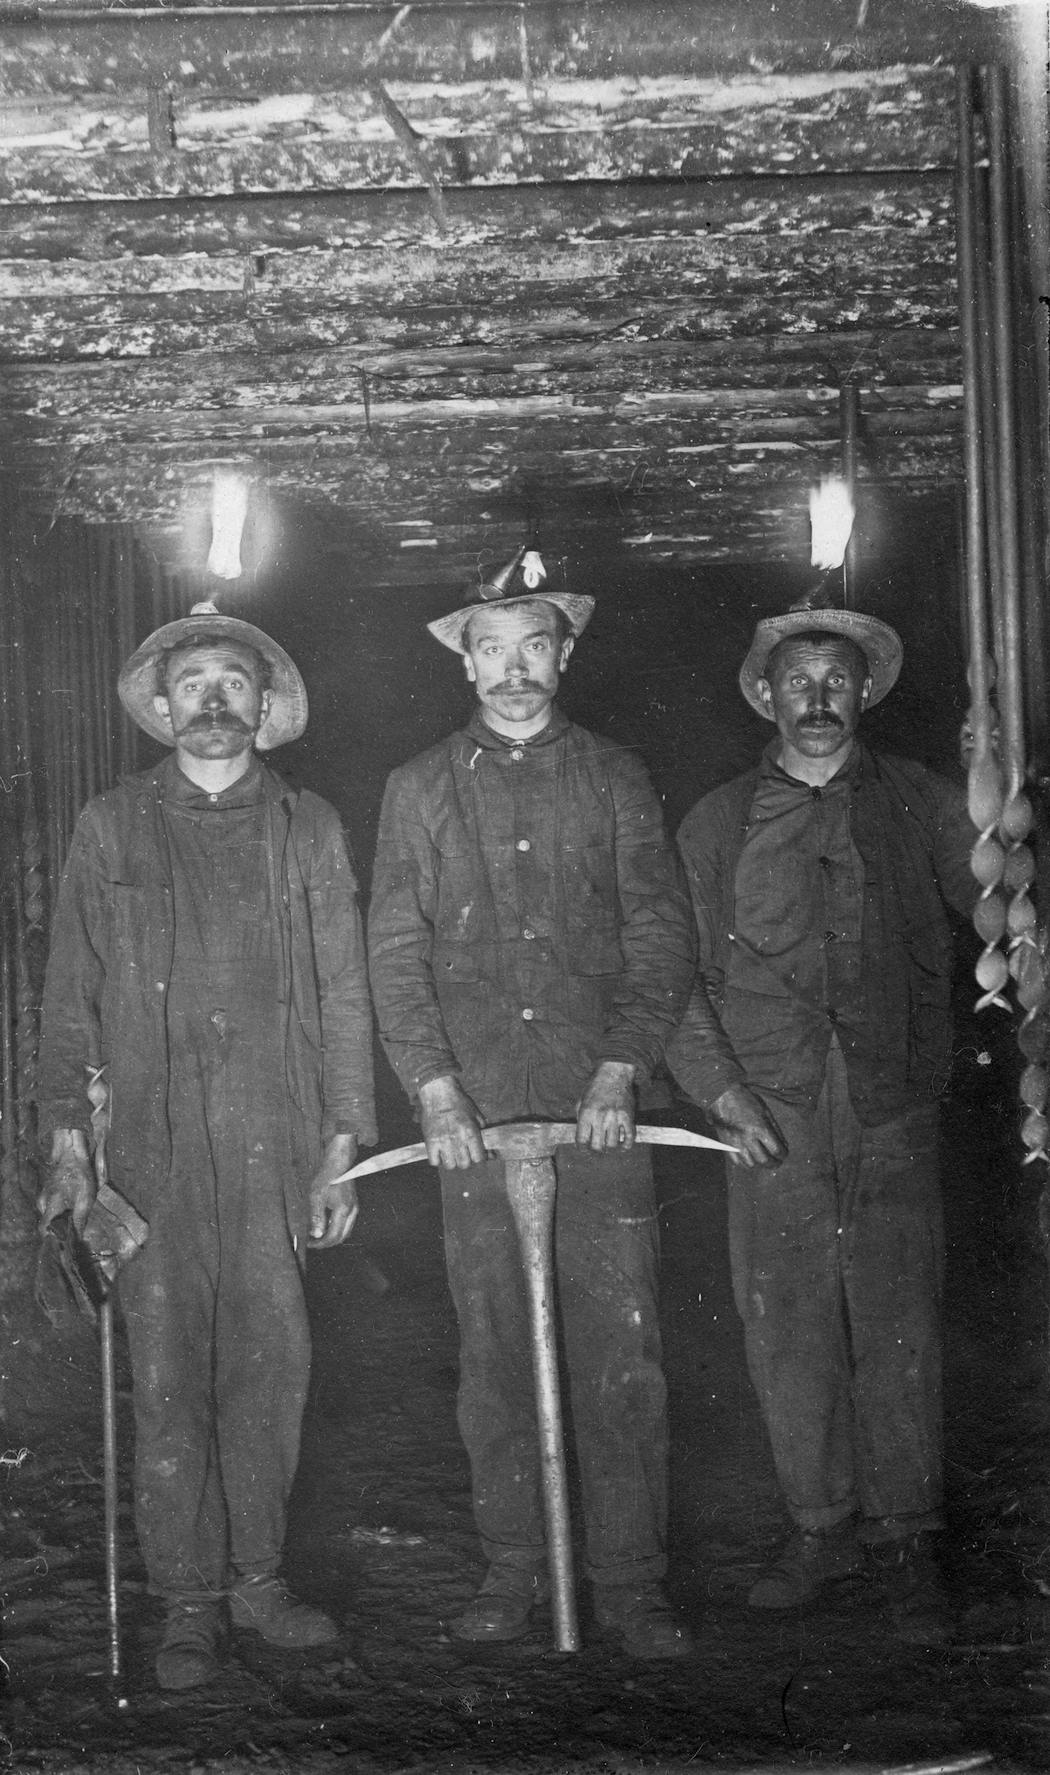 Underground miners in a shaft in the early 1900s, wearing leather helmets and candles.